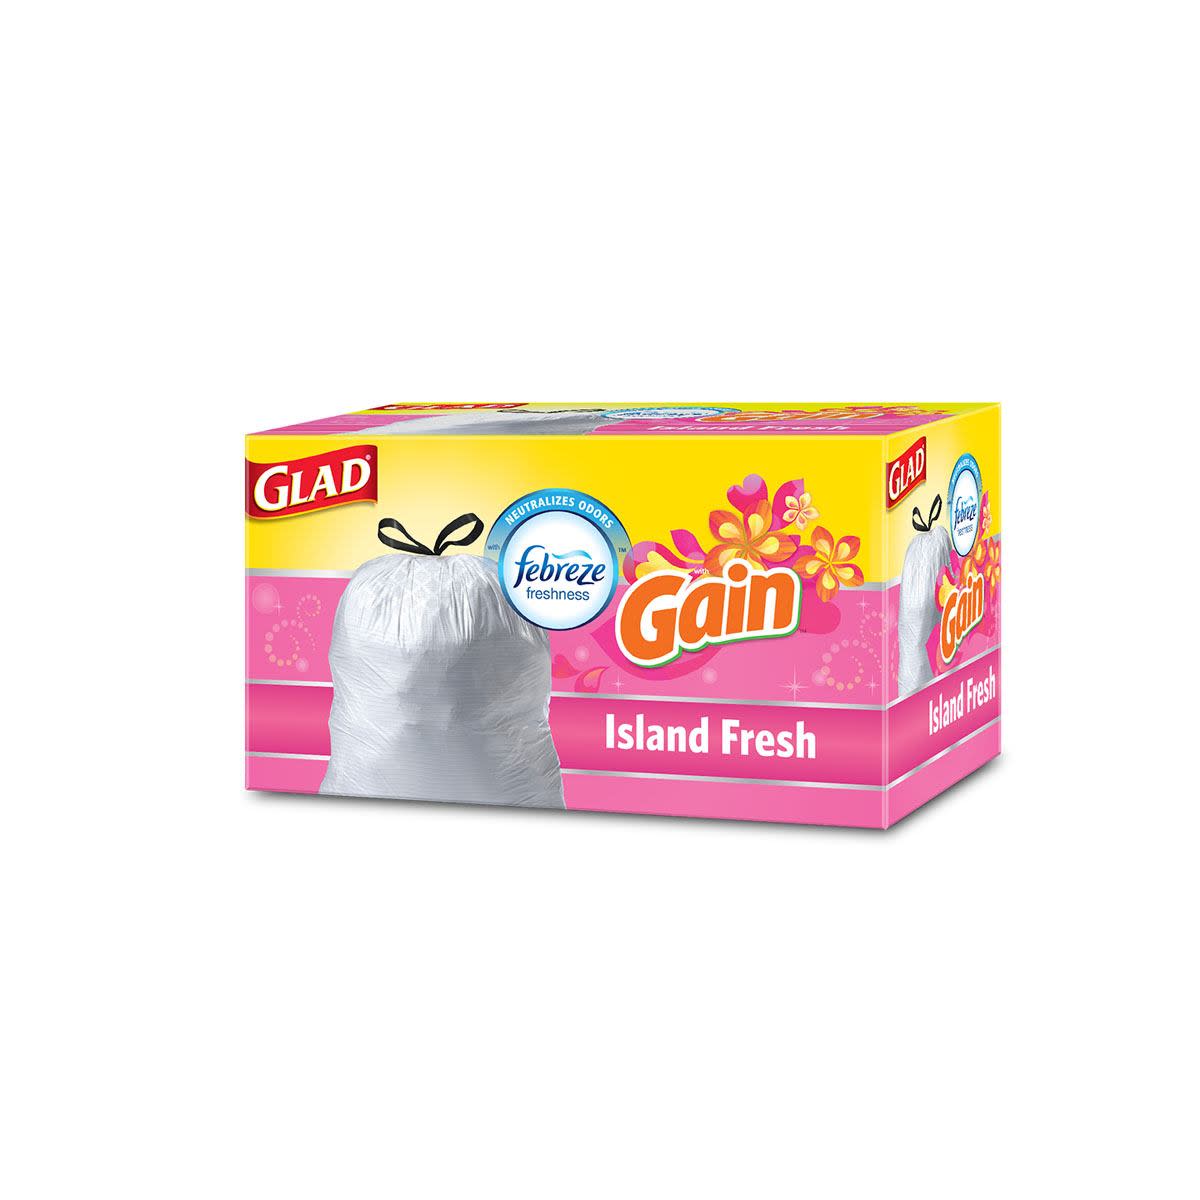 Glad Trash Bags with the scent of Gain Island Fresh